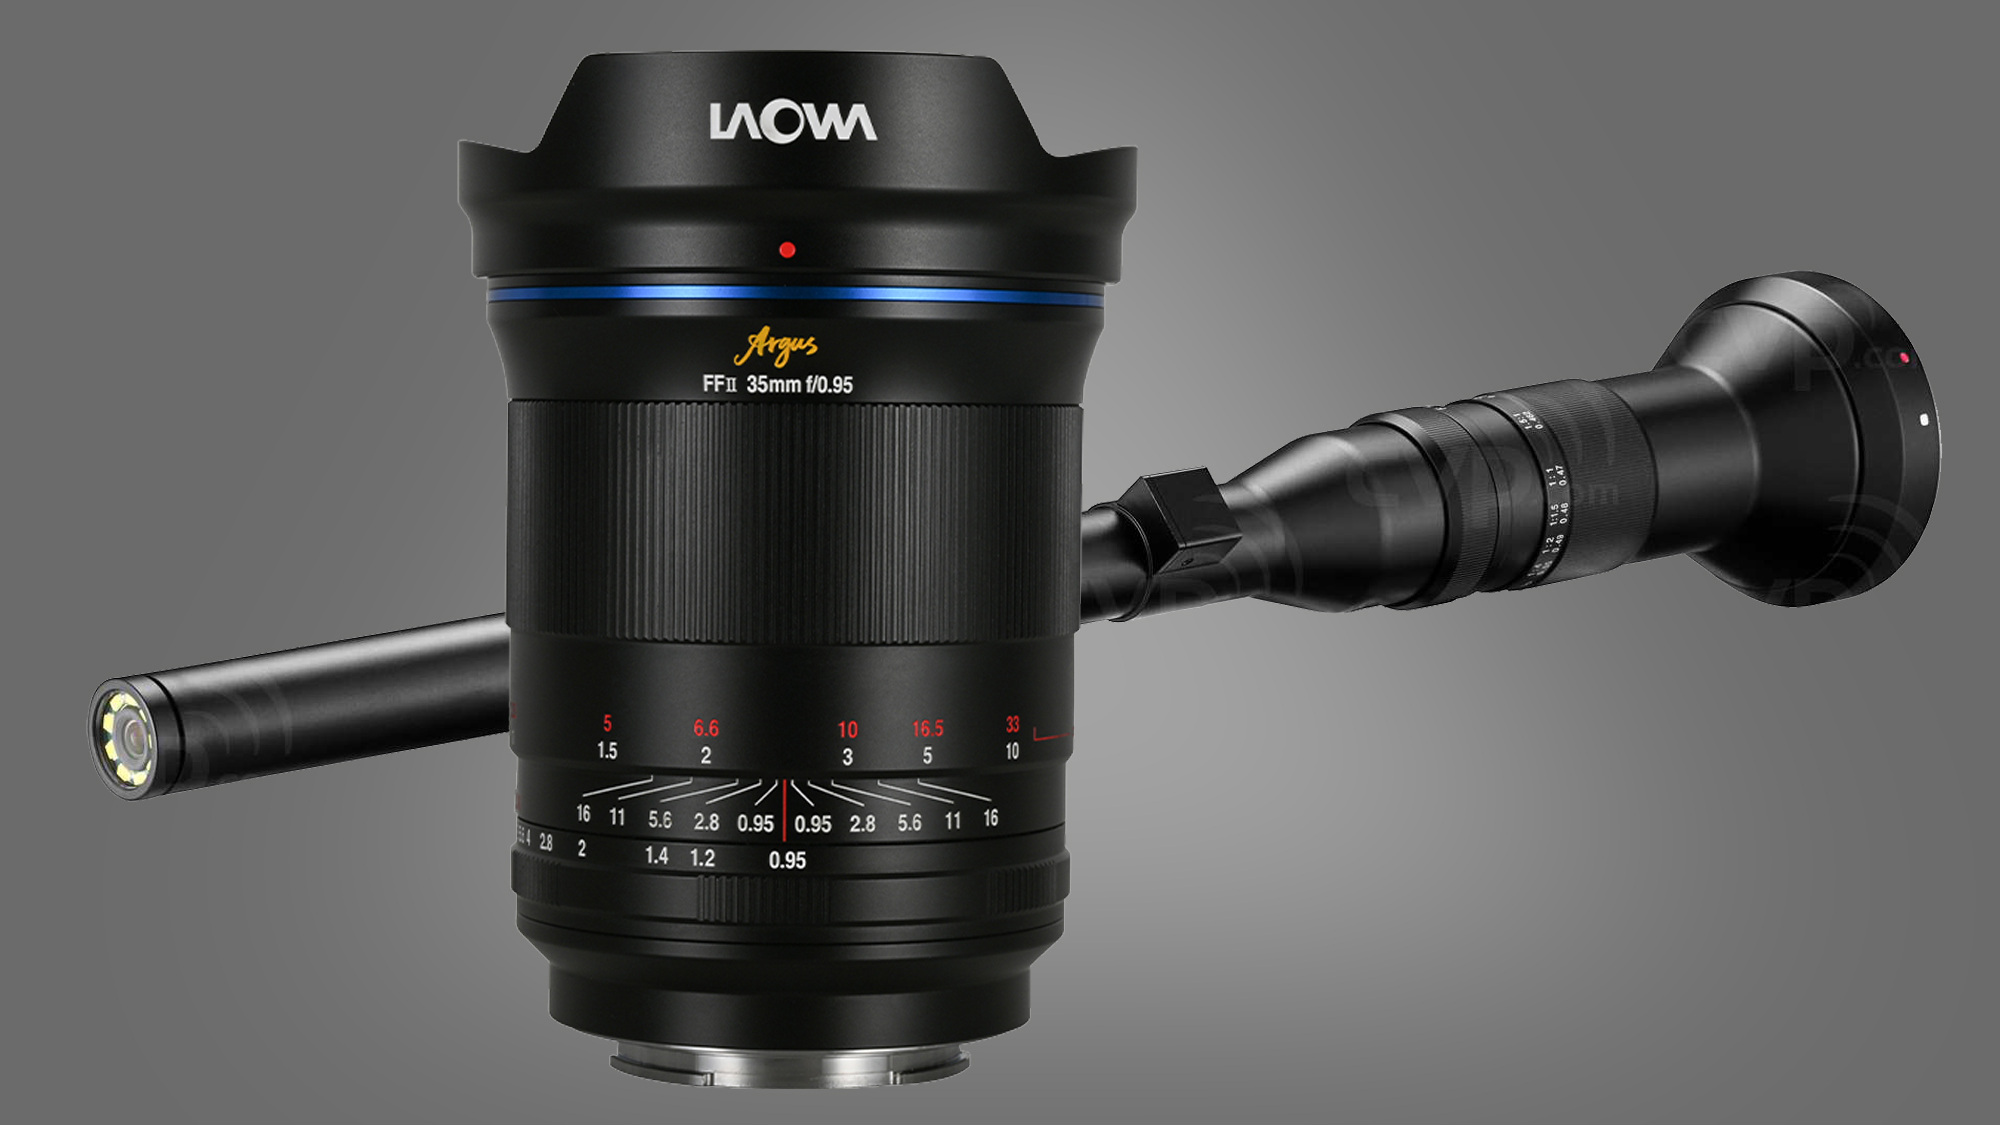 Two Laowa camera lenses on a grey background